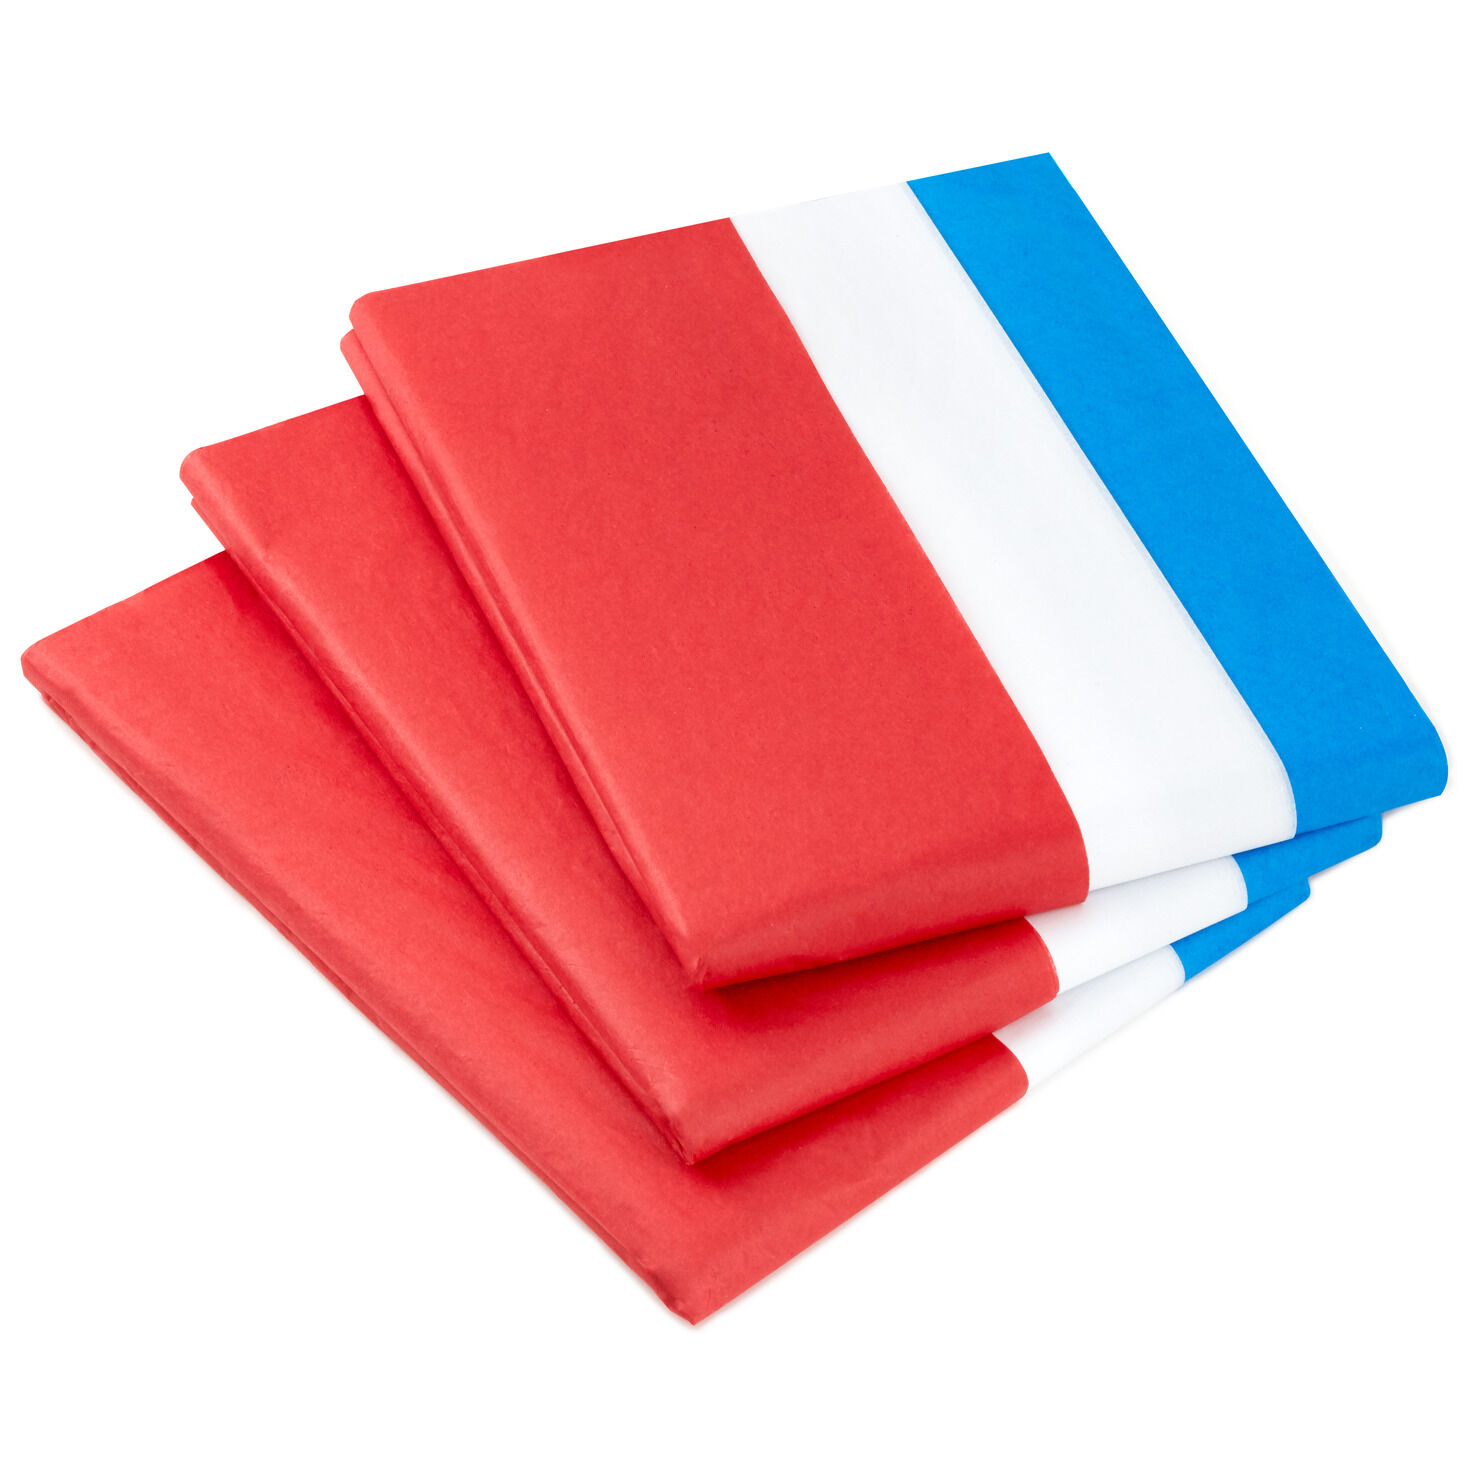 40 Sheets Red/white/green Tissue Paper Trio Pack : Target